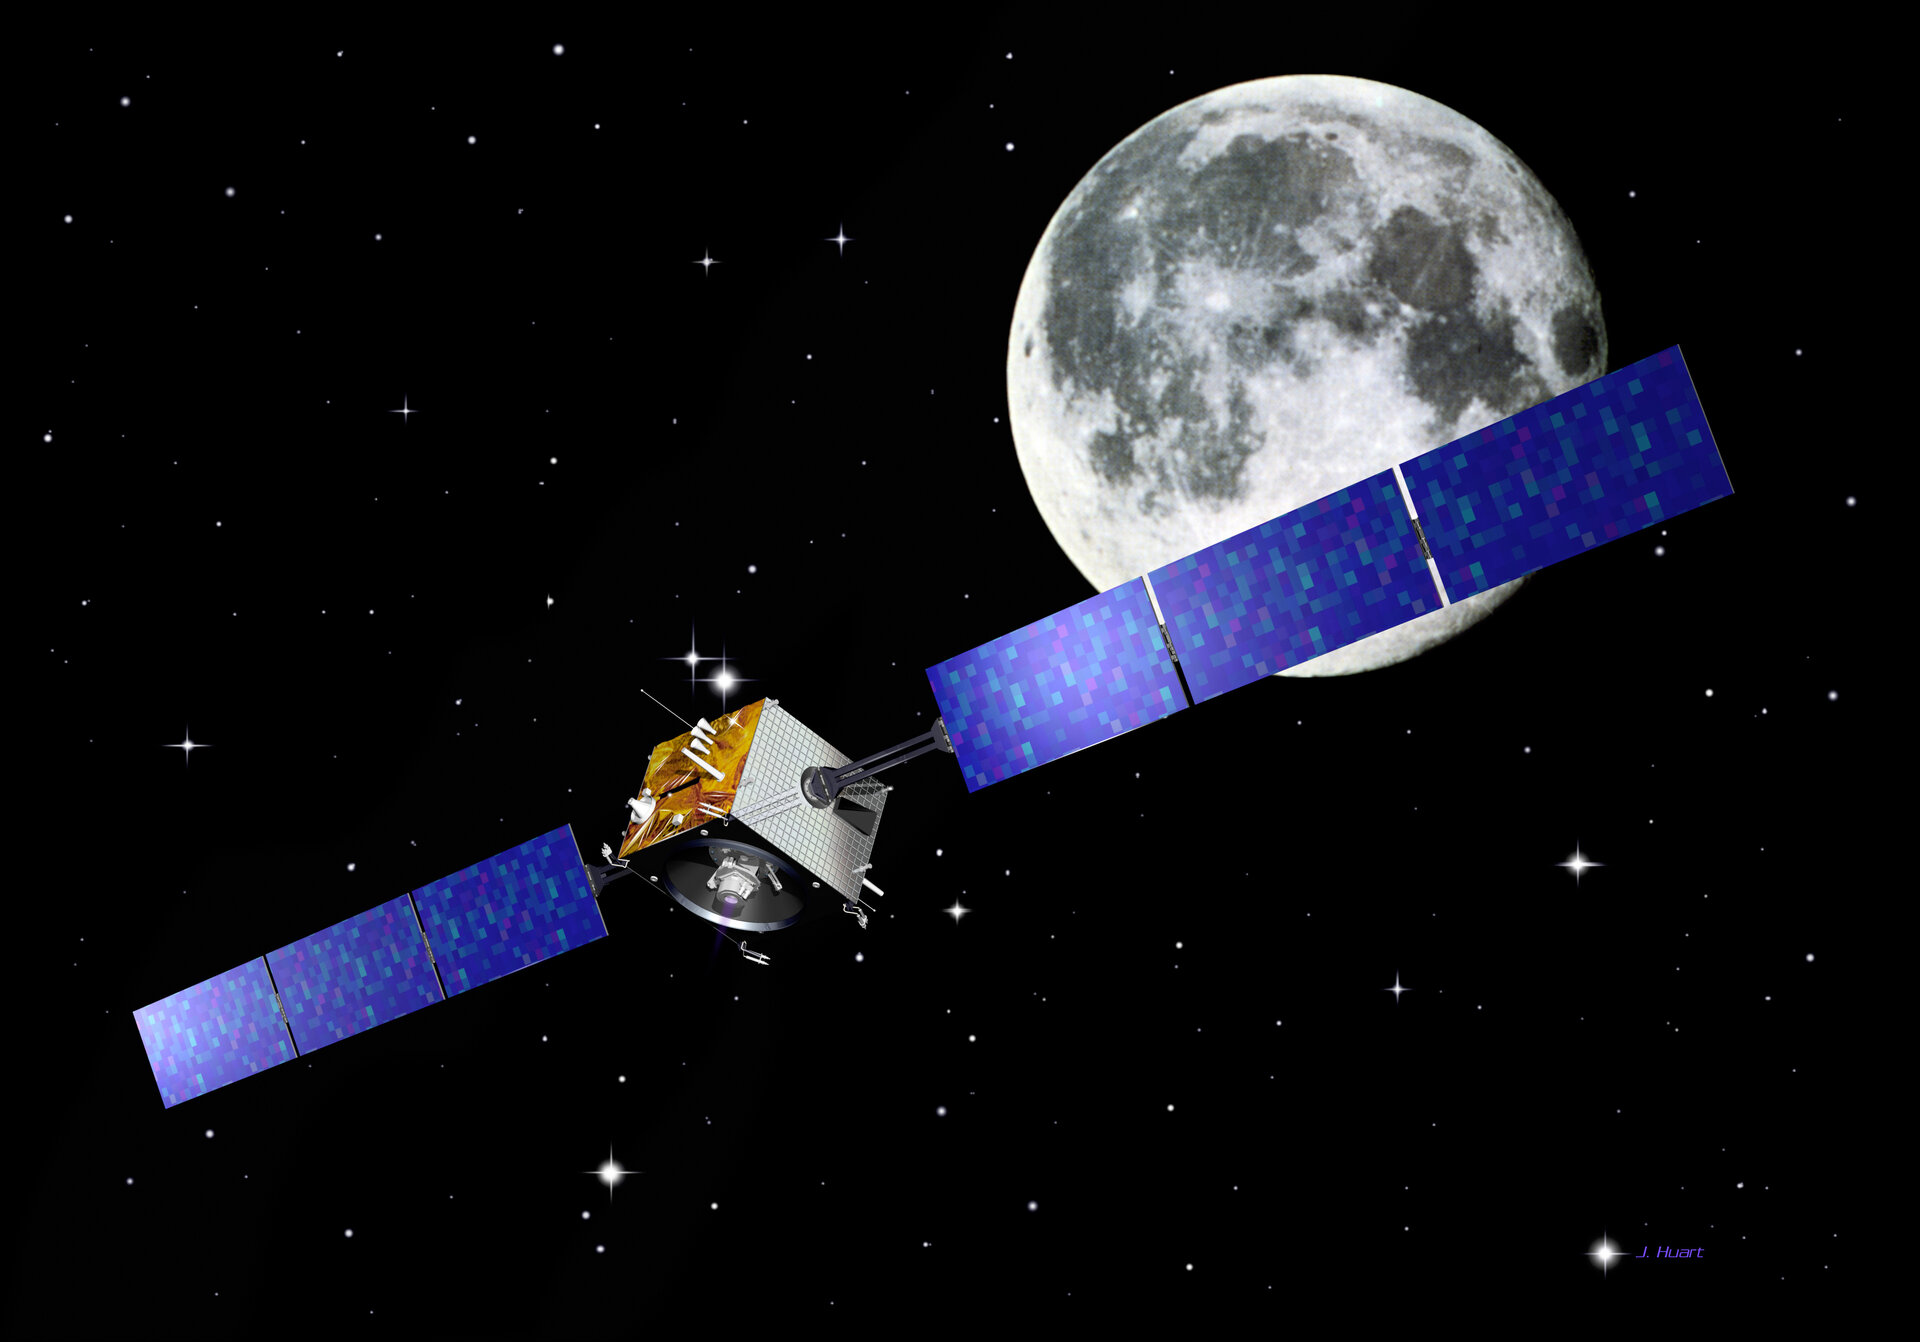 SMART-1 is travelling to the Moon using a new solar-electric propulsion system